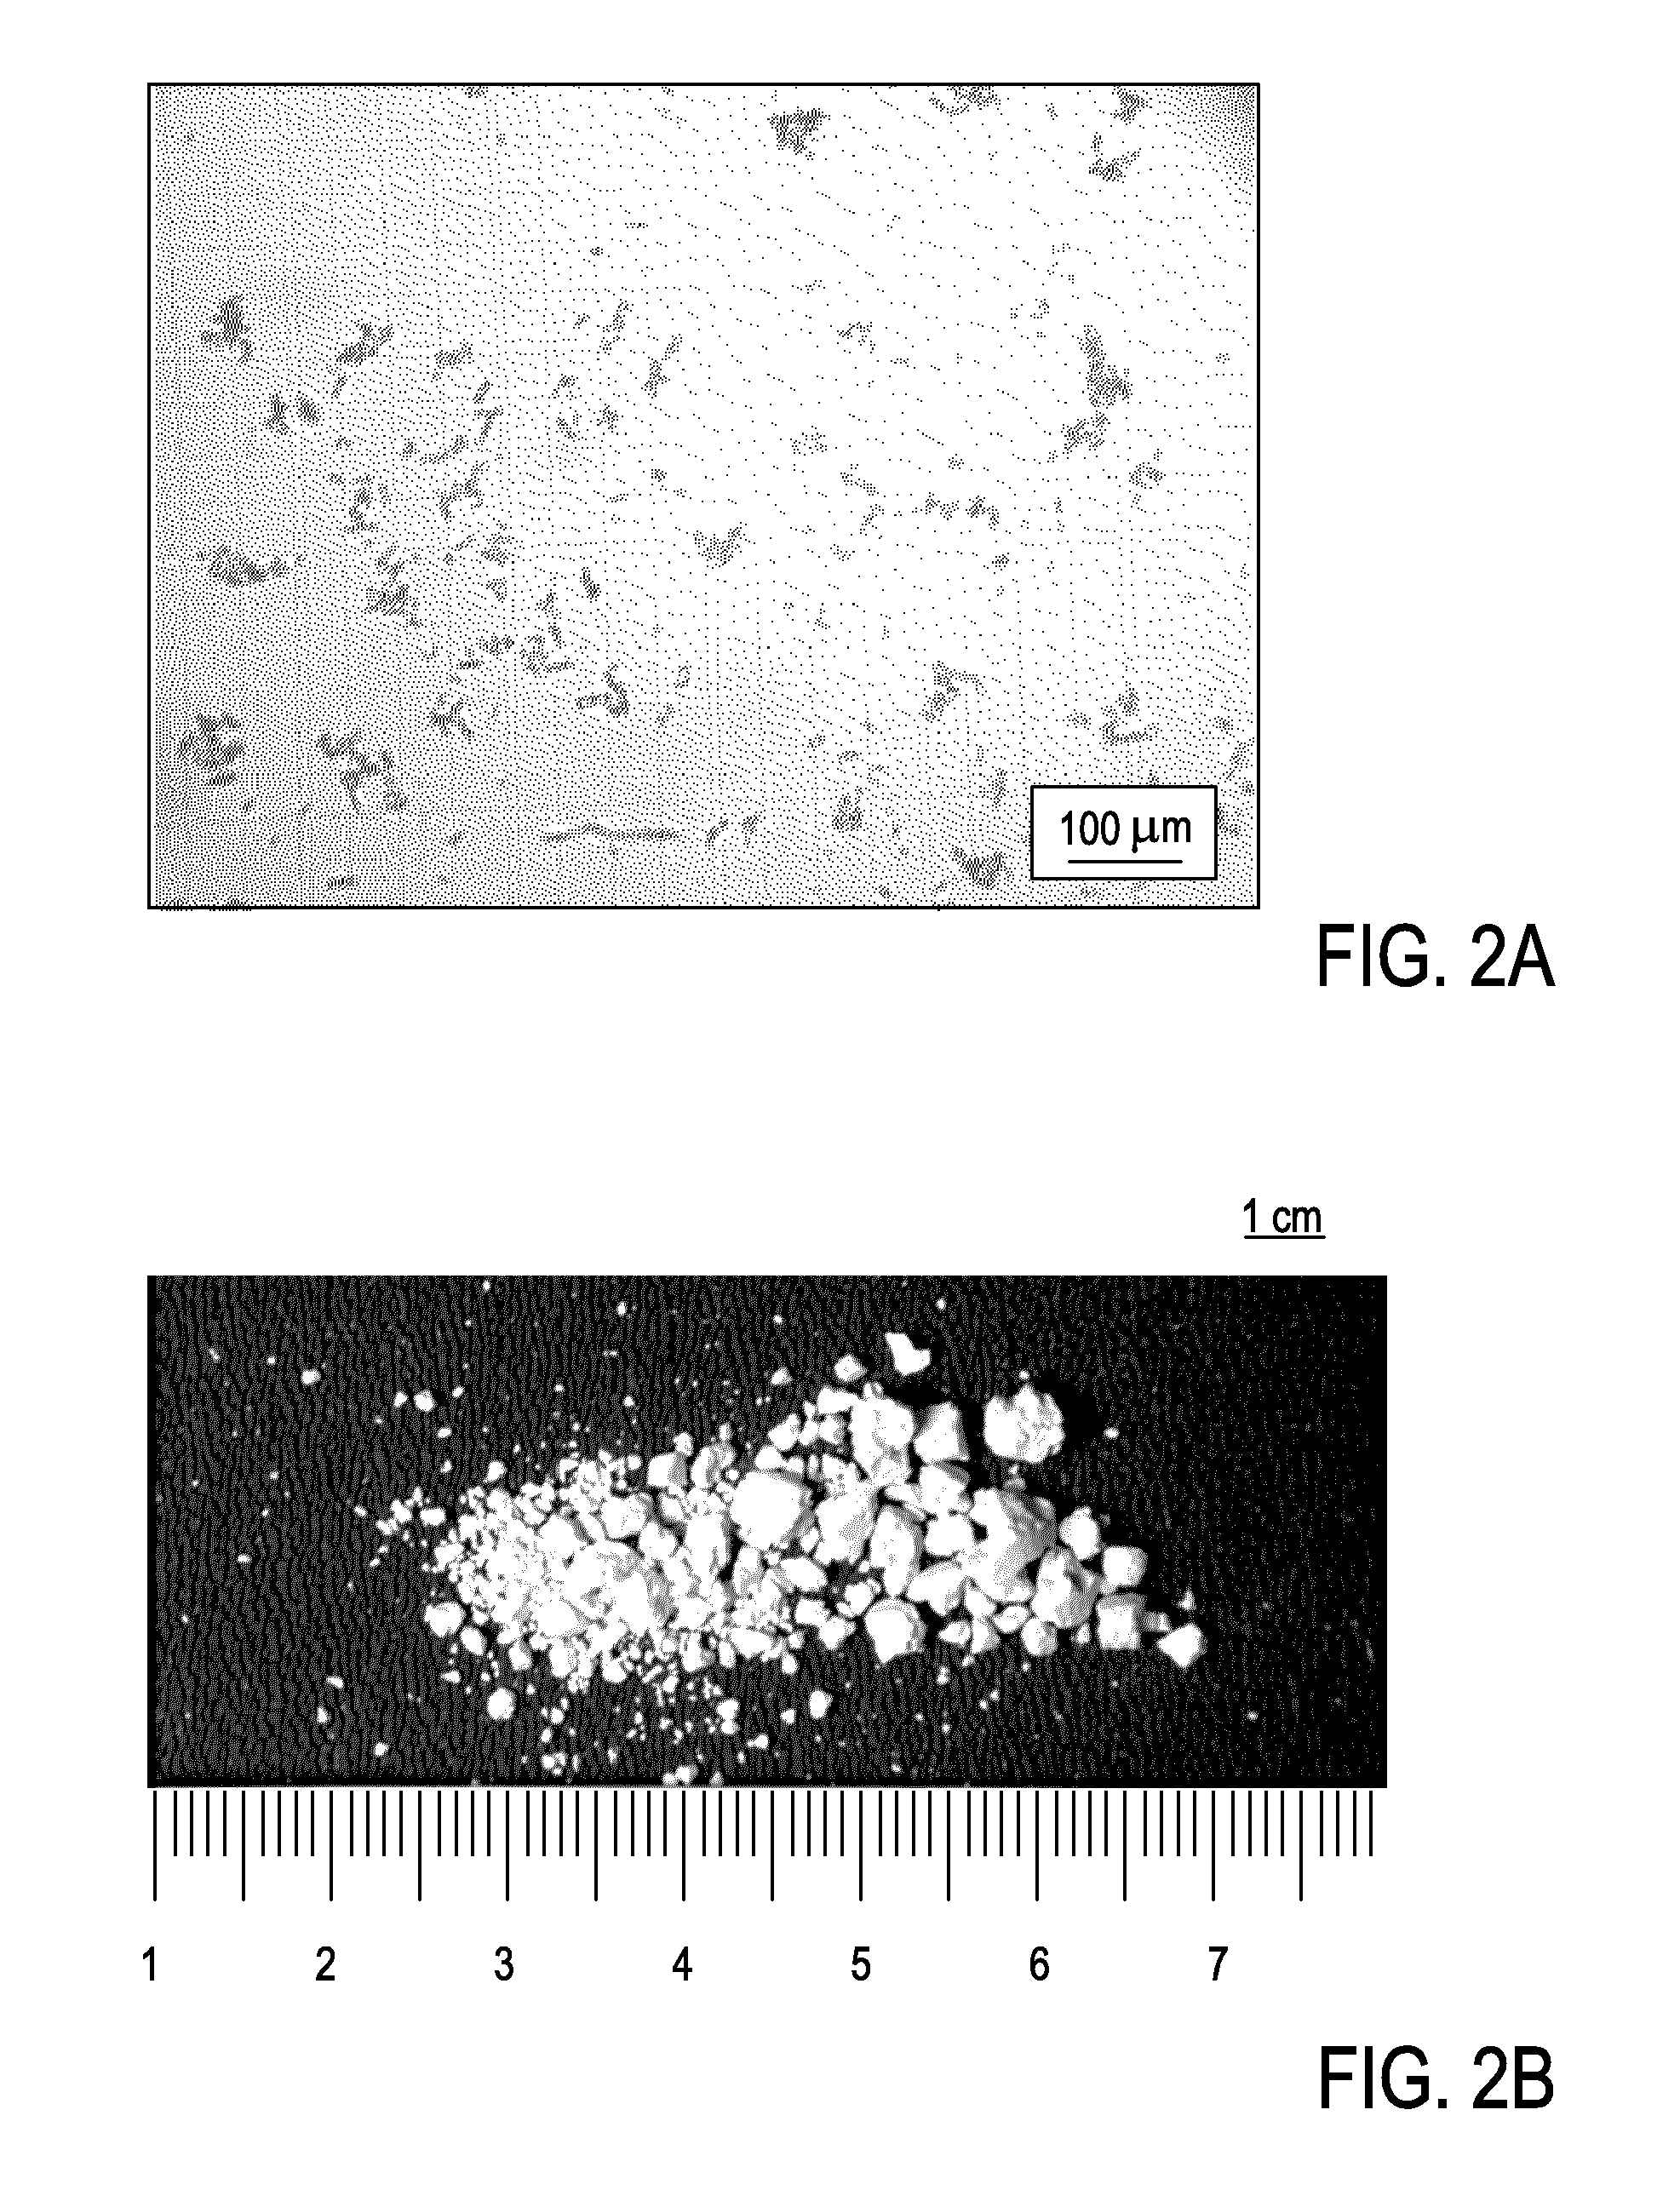 Devices and methods for using controlled bubble cloud cavitation in fractionating urinary stones